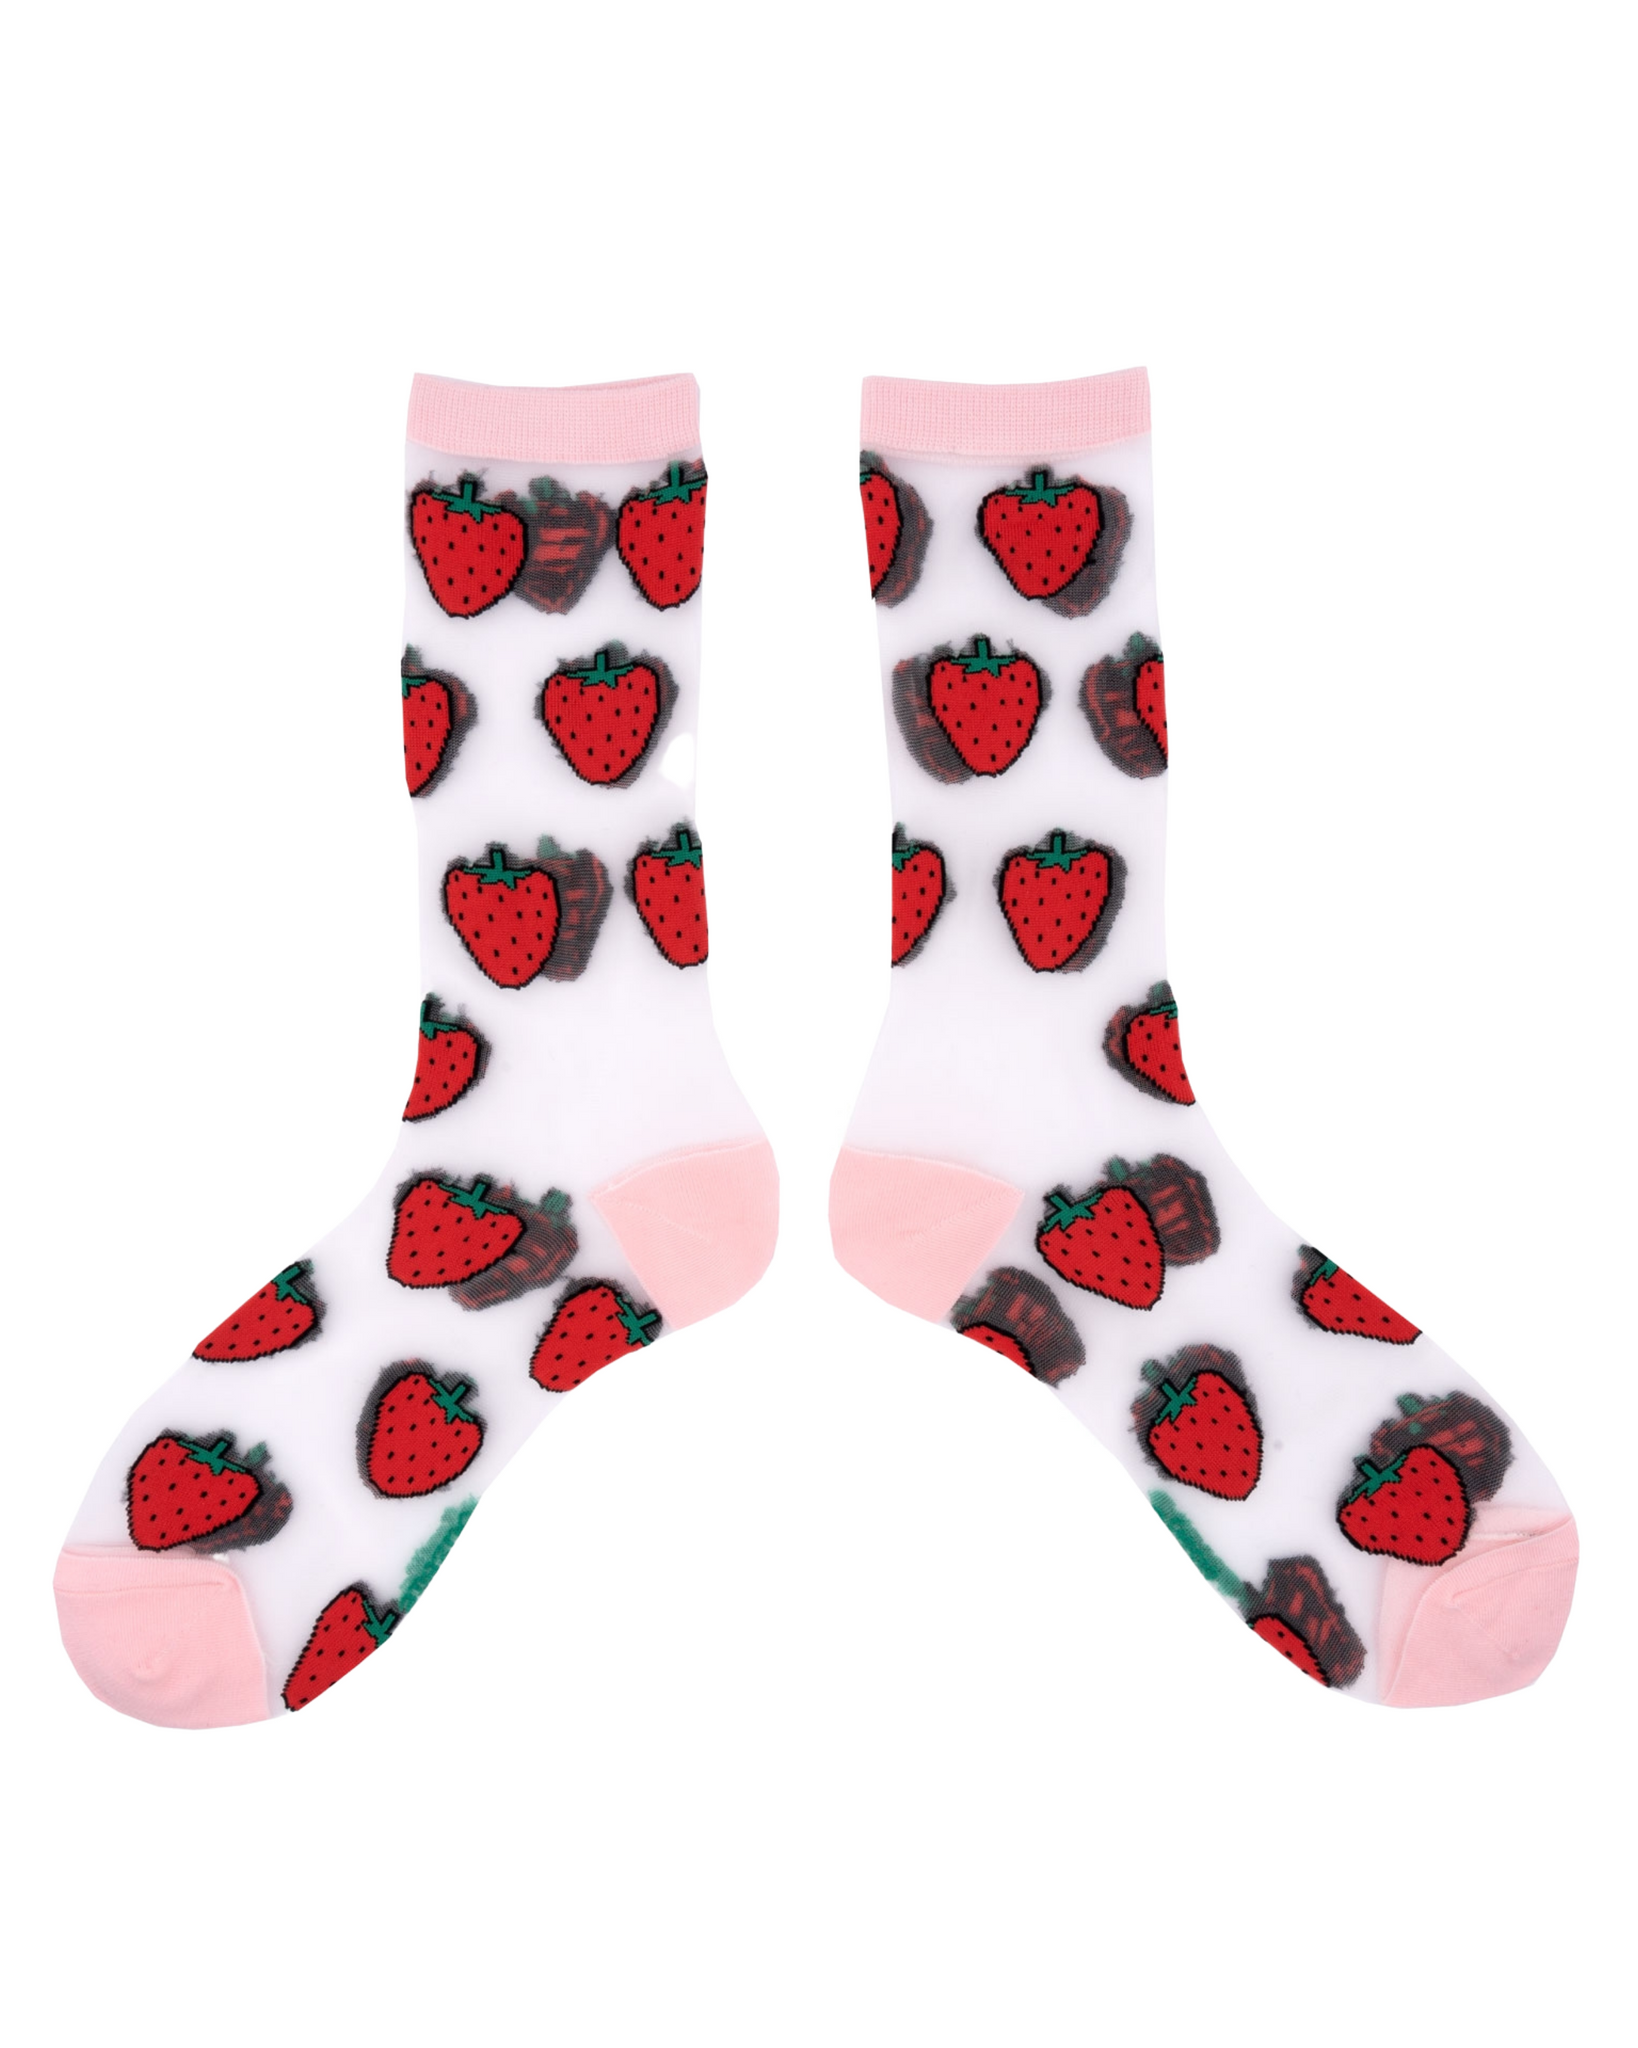 Coucou Suzette - Sheer Berry Socks